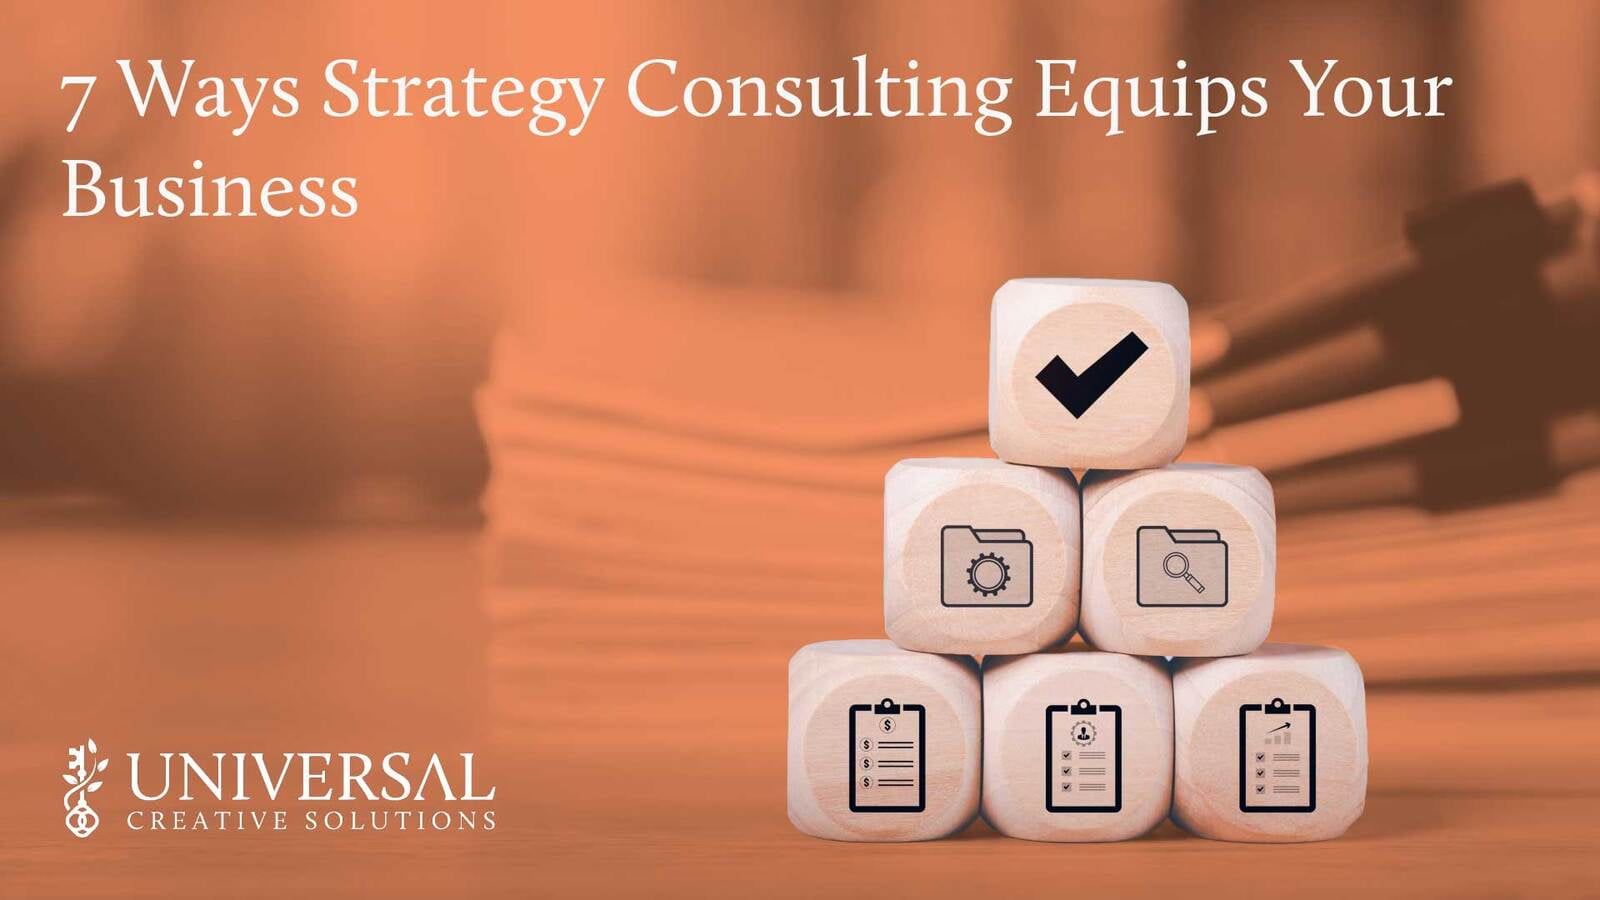 7 Ways Strategy Consulting Equips Your Business